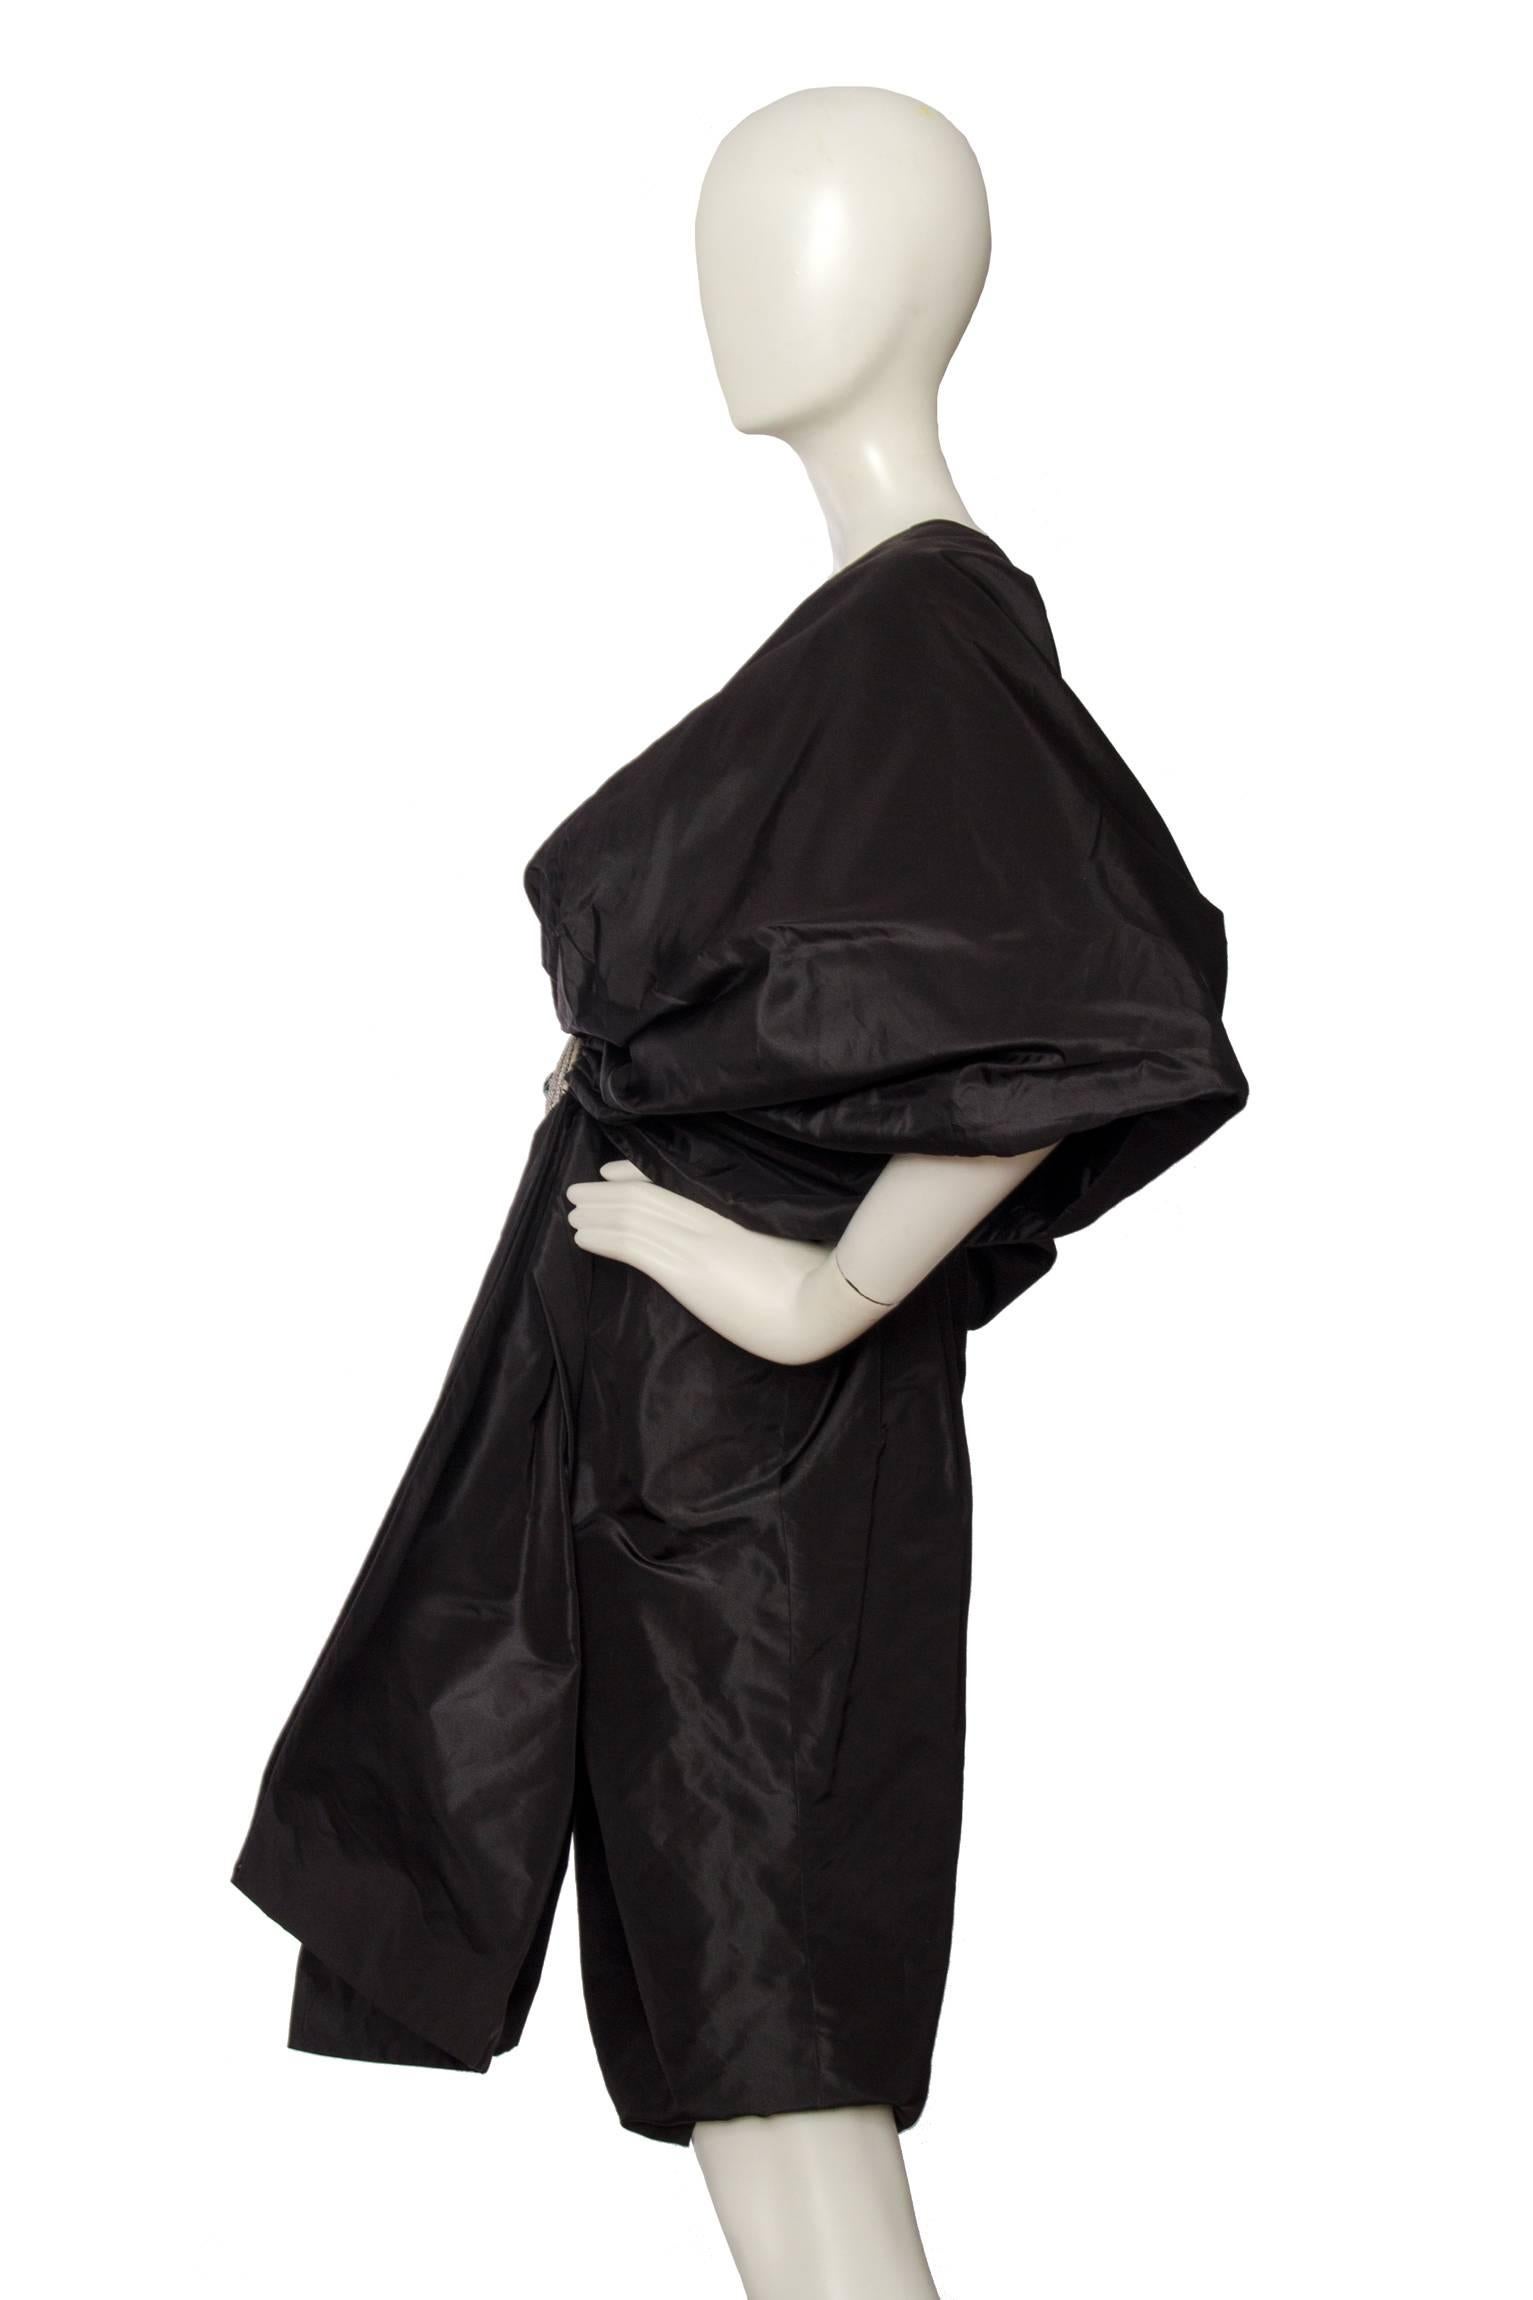 A fun 80s Chloé ´bow´ black taffeta cocktail dress with a secondary fitted strap dress with a large bow detail attached to the front. The bow is to be worn as sleeves covering the entire upper arm and the shoulders and measures 52 cm in